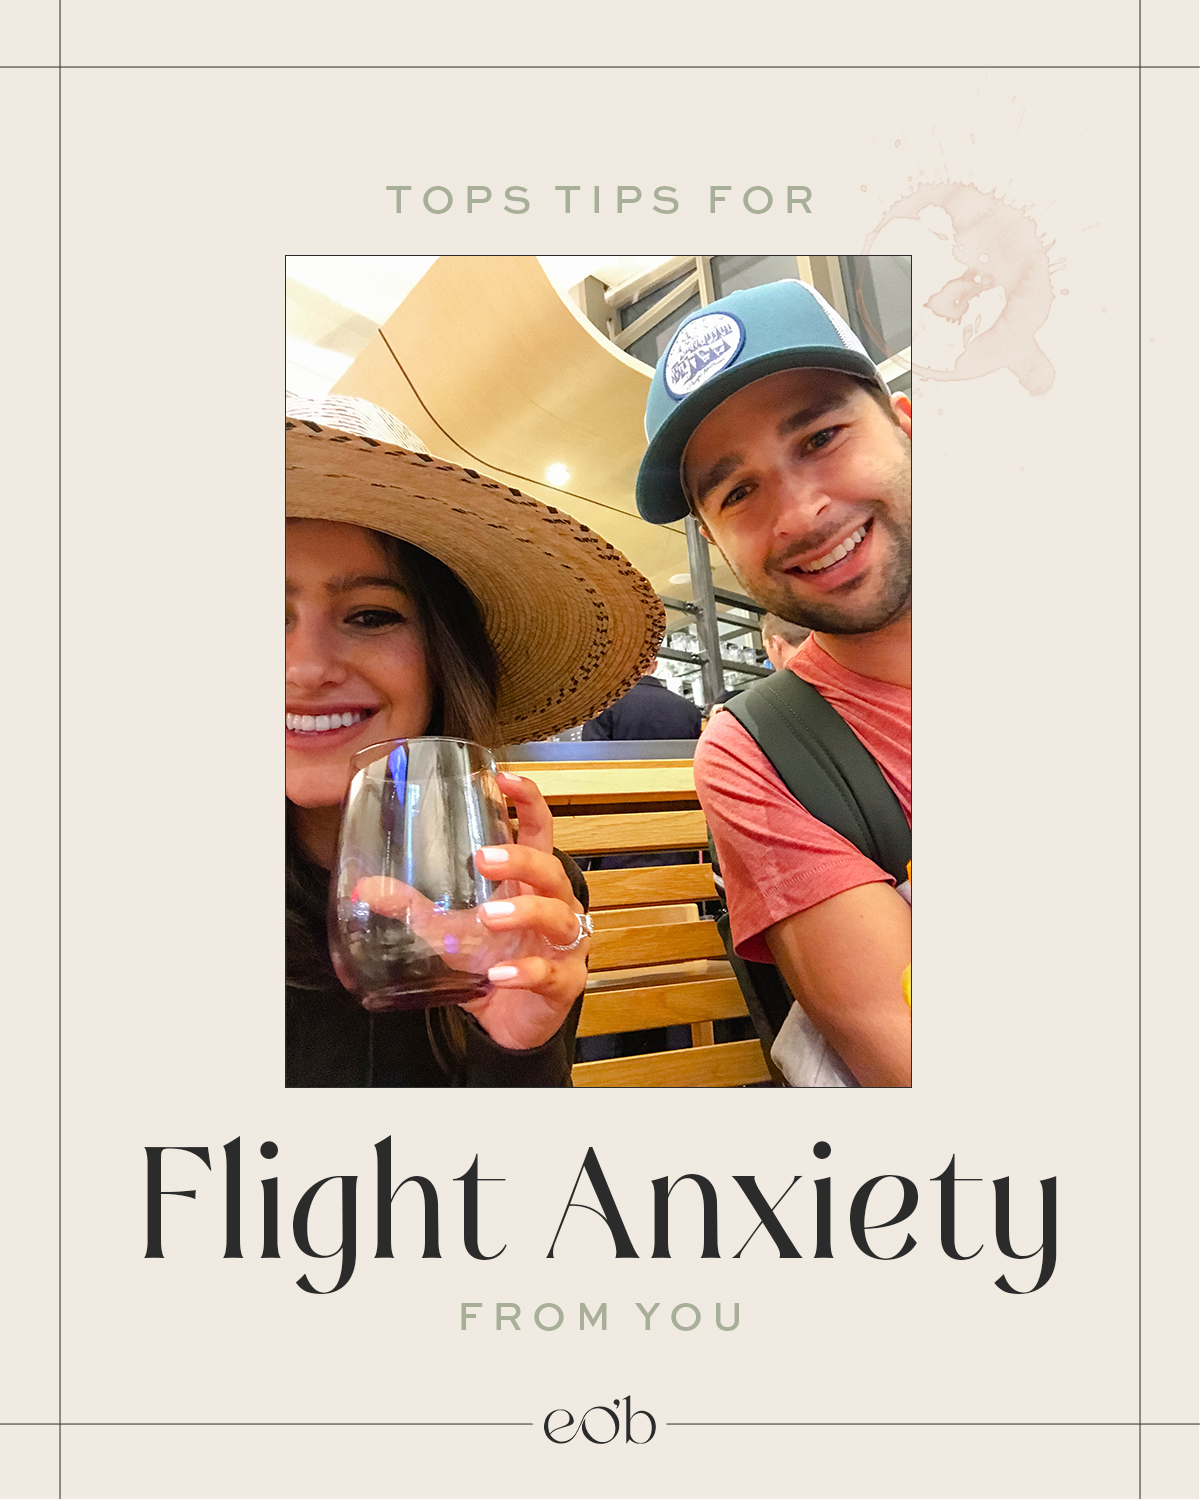 Your Recommendations for Flight Anxiety